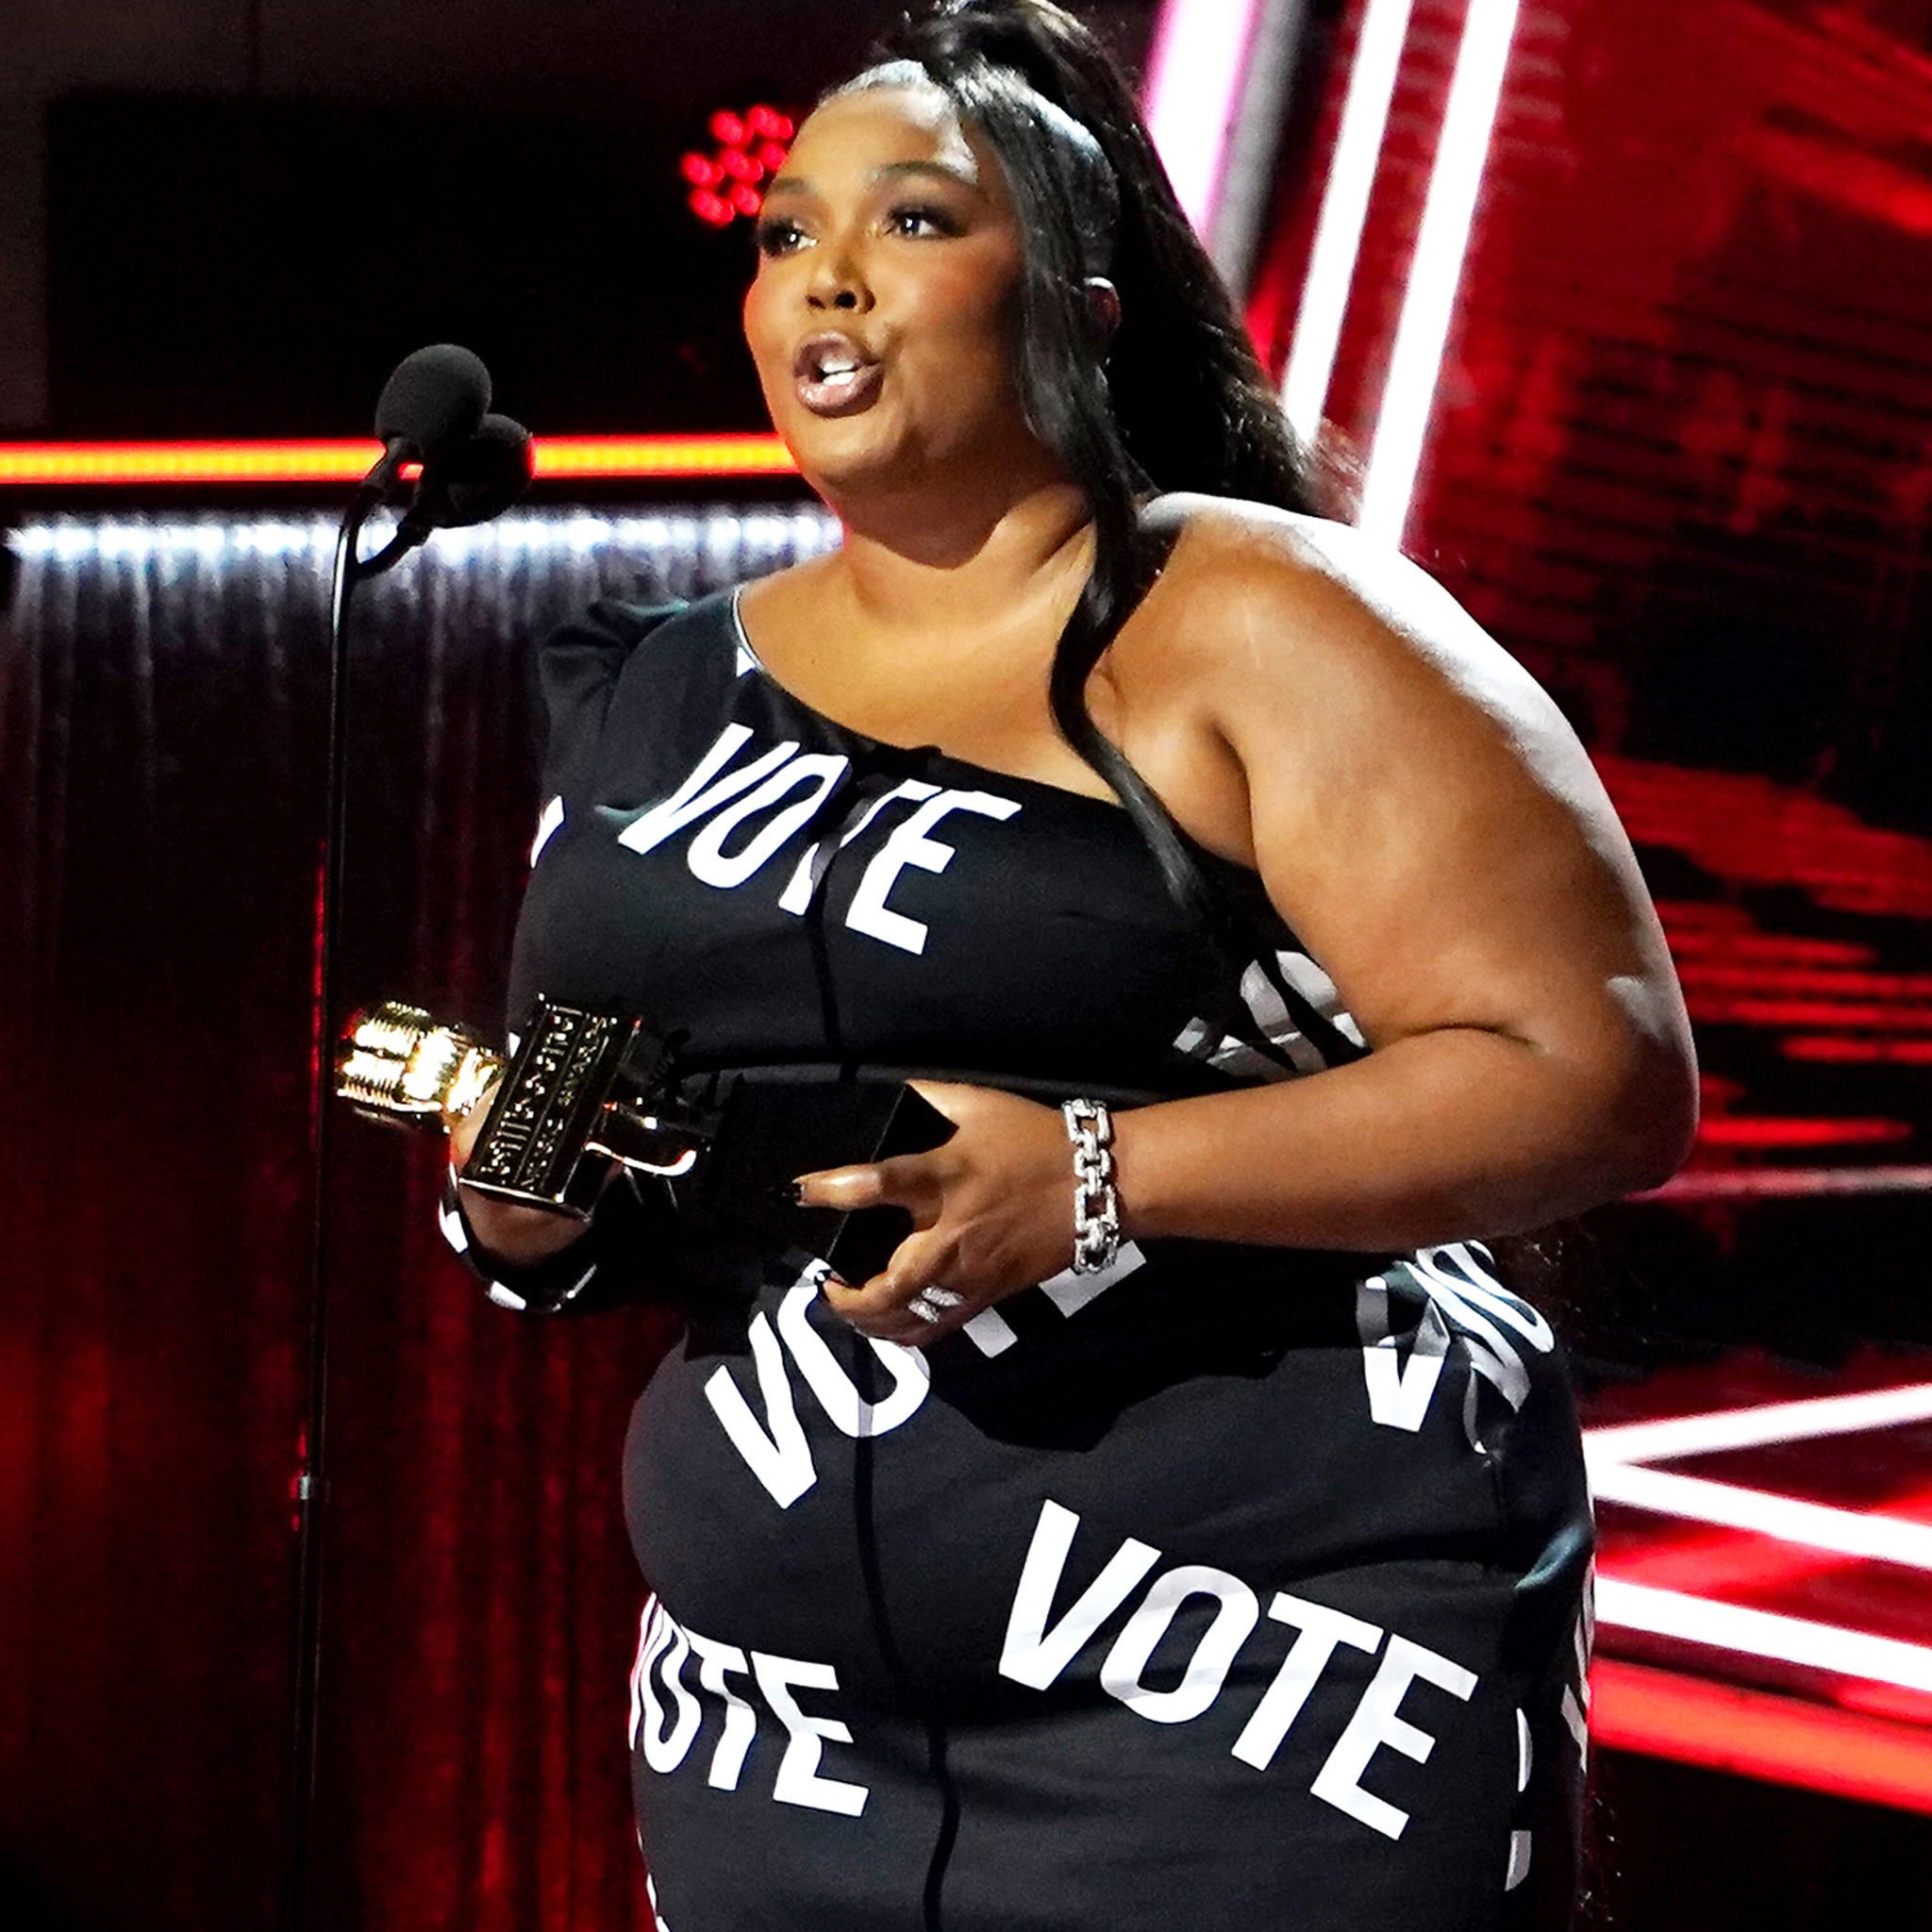 Lizzo Rocks Dress As She Gives Powerful Speech About Suppression at Billboard Music Awards